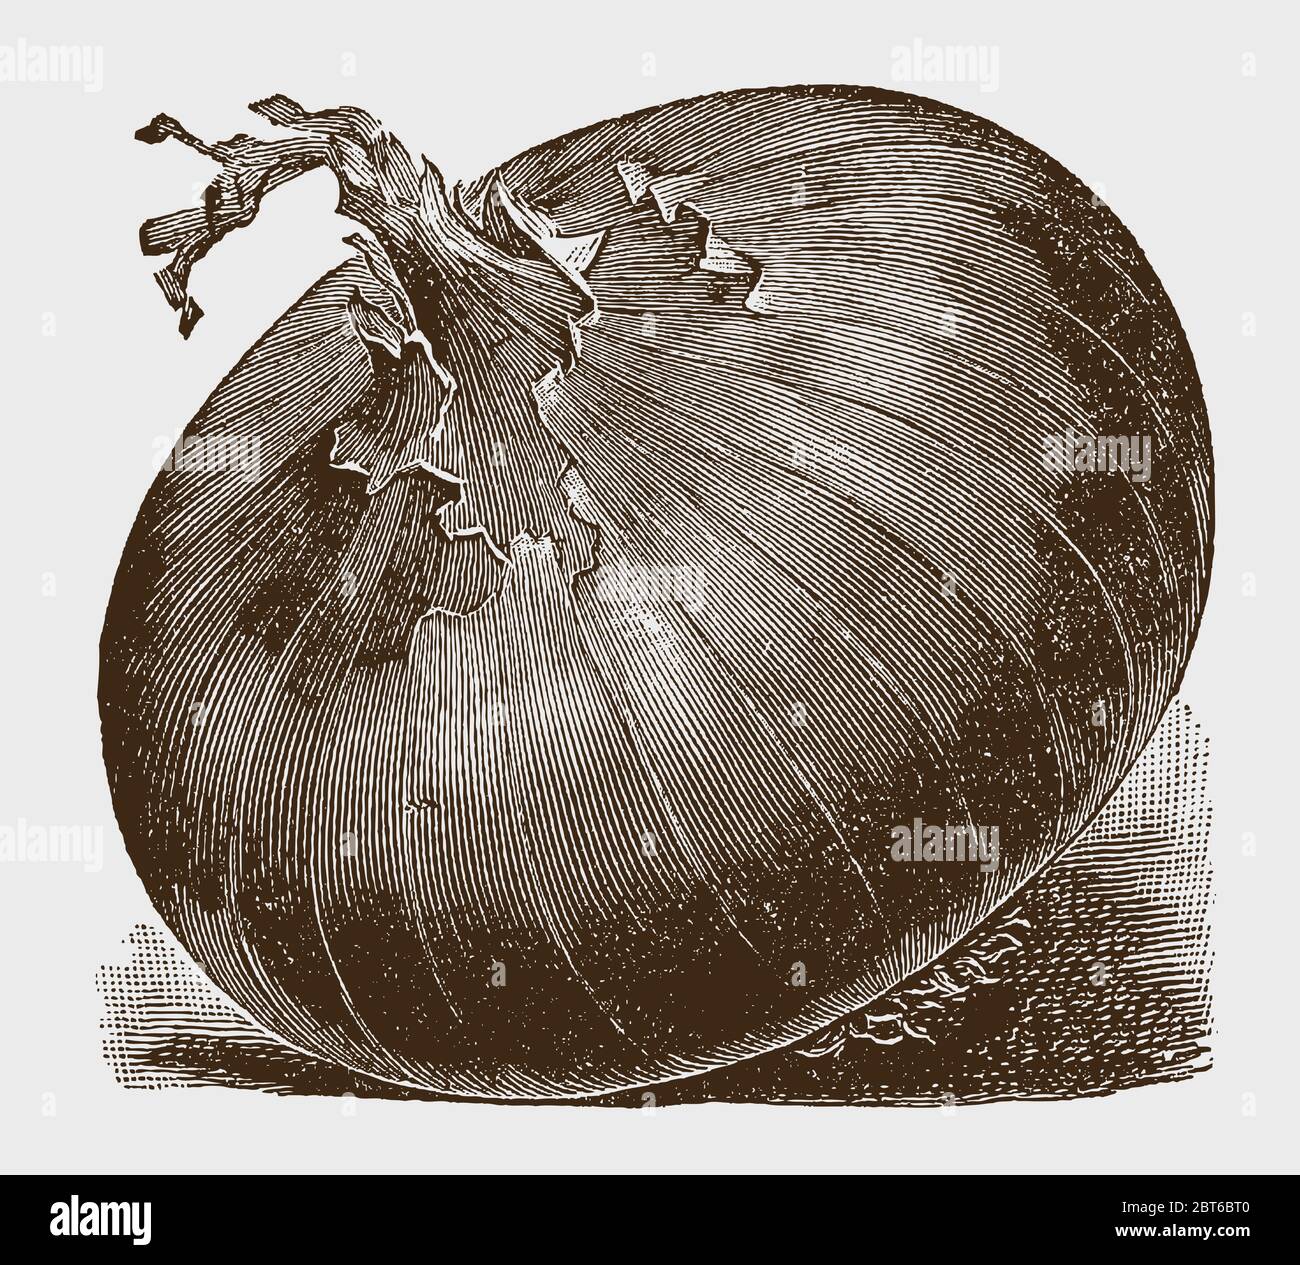 Flattened onion with a brittle top, lying slightly tilted to the side, after a historical engraving from the early 20th century Stock Vector